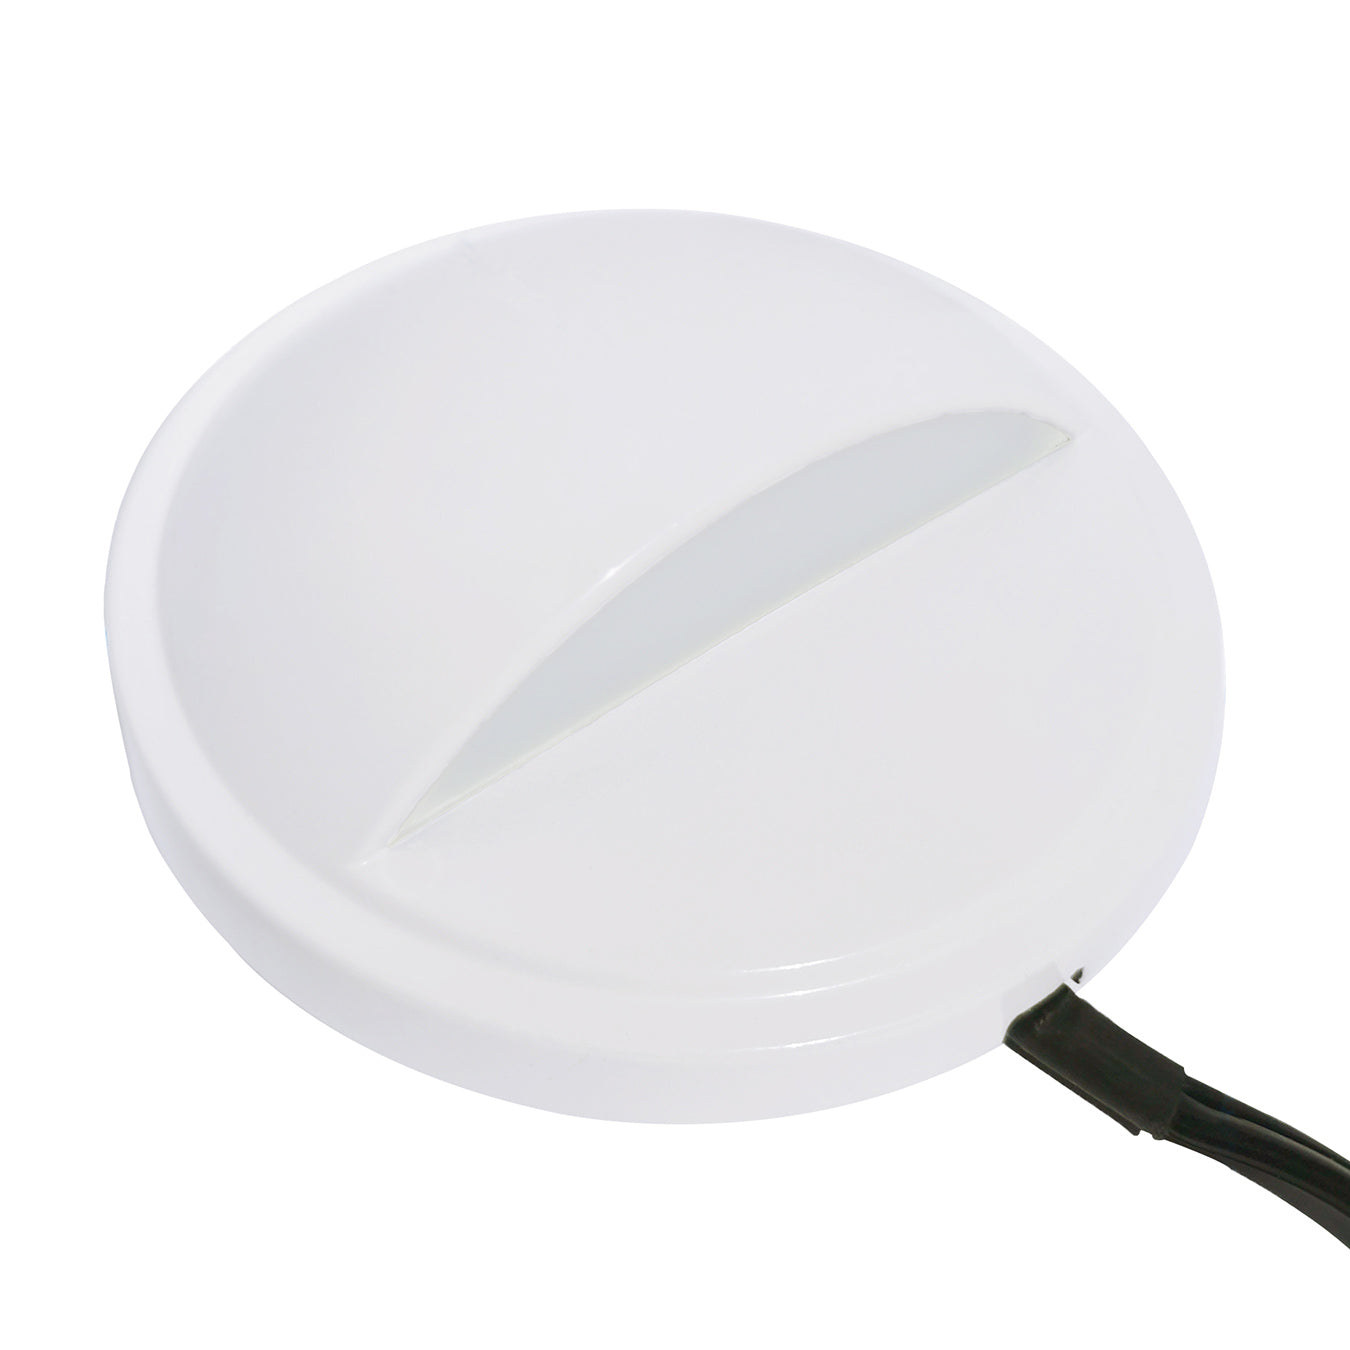 Low Voltage Eyelid Deck Light with 2W Integrated LED Chips, 12V AC/DC, White, Φ3.35" X H1.23"